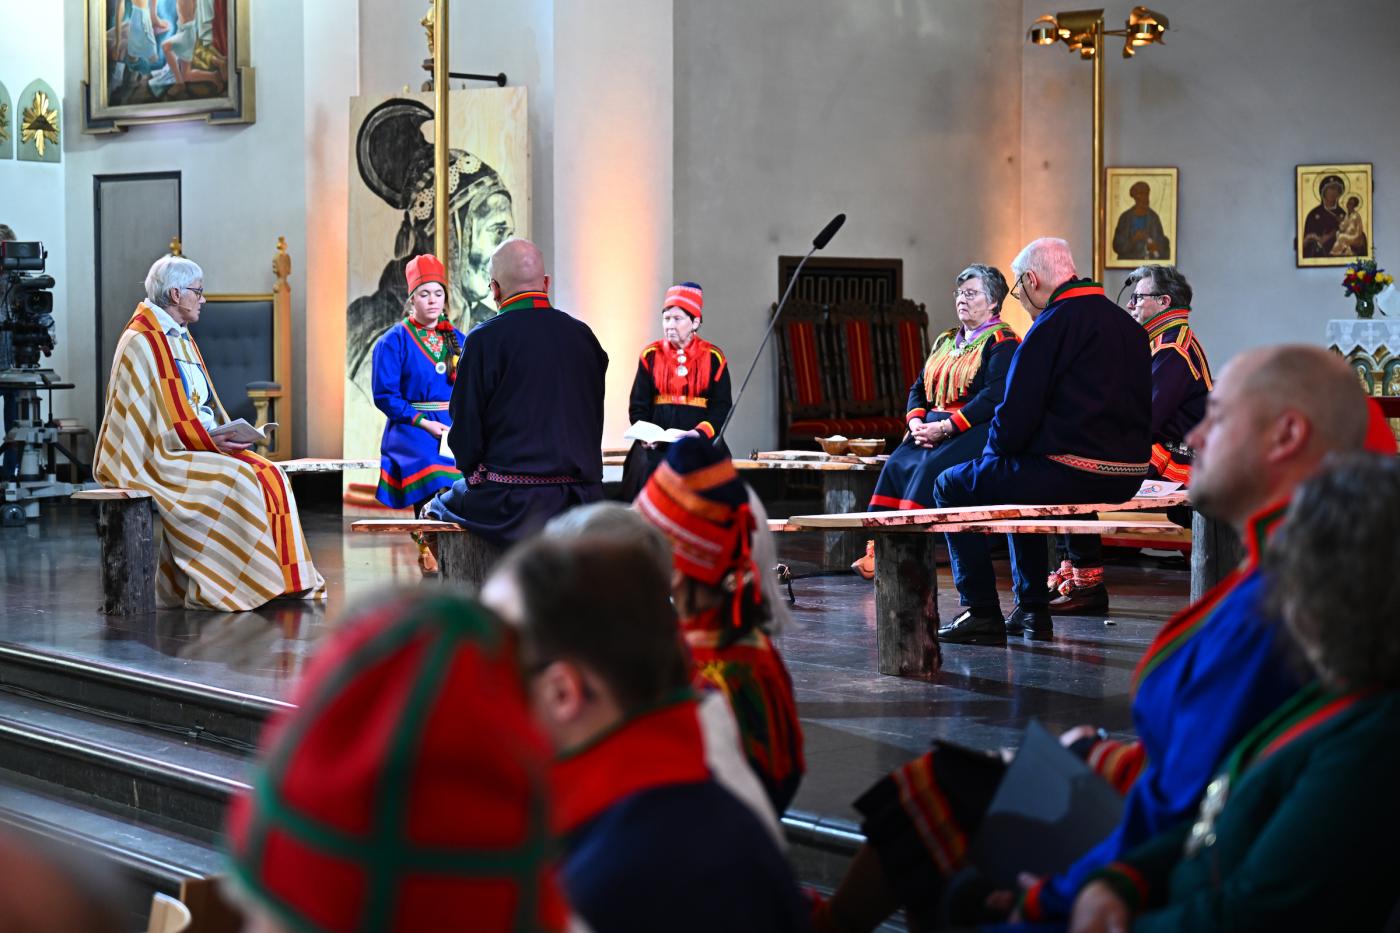 Group of people, some dressed in religious garb and some in traditional Sami indigenous clothing, gathered in a circle in a church building.